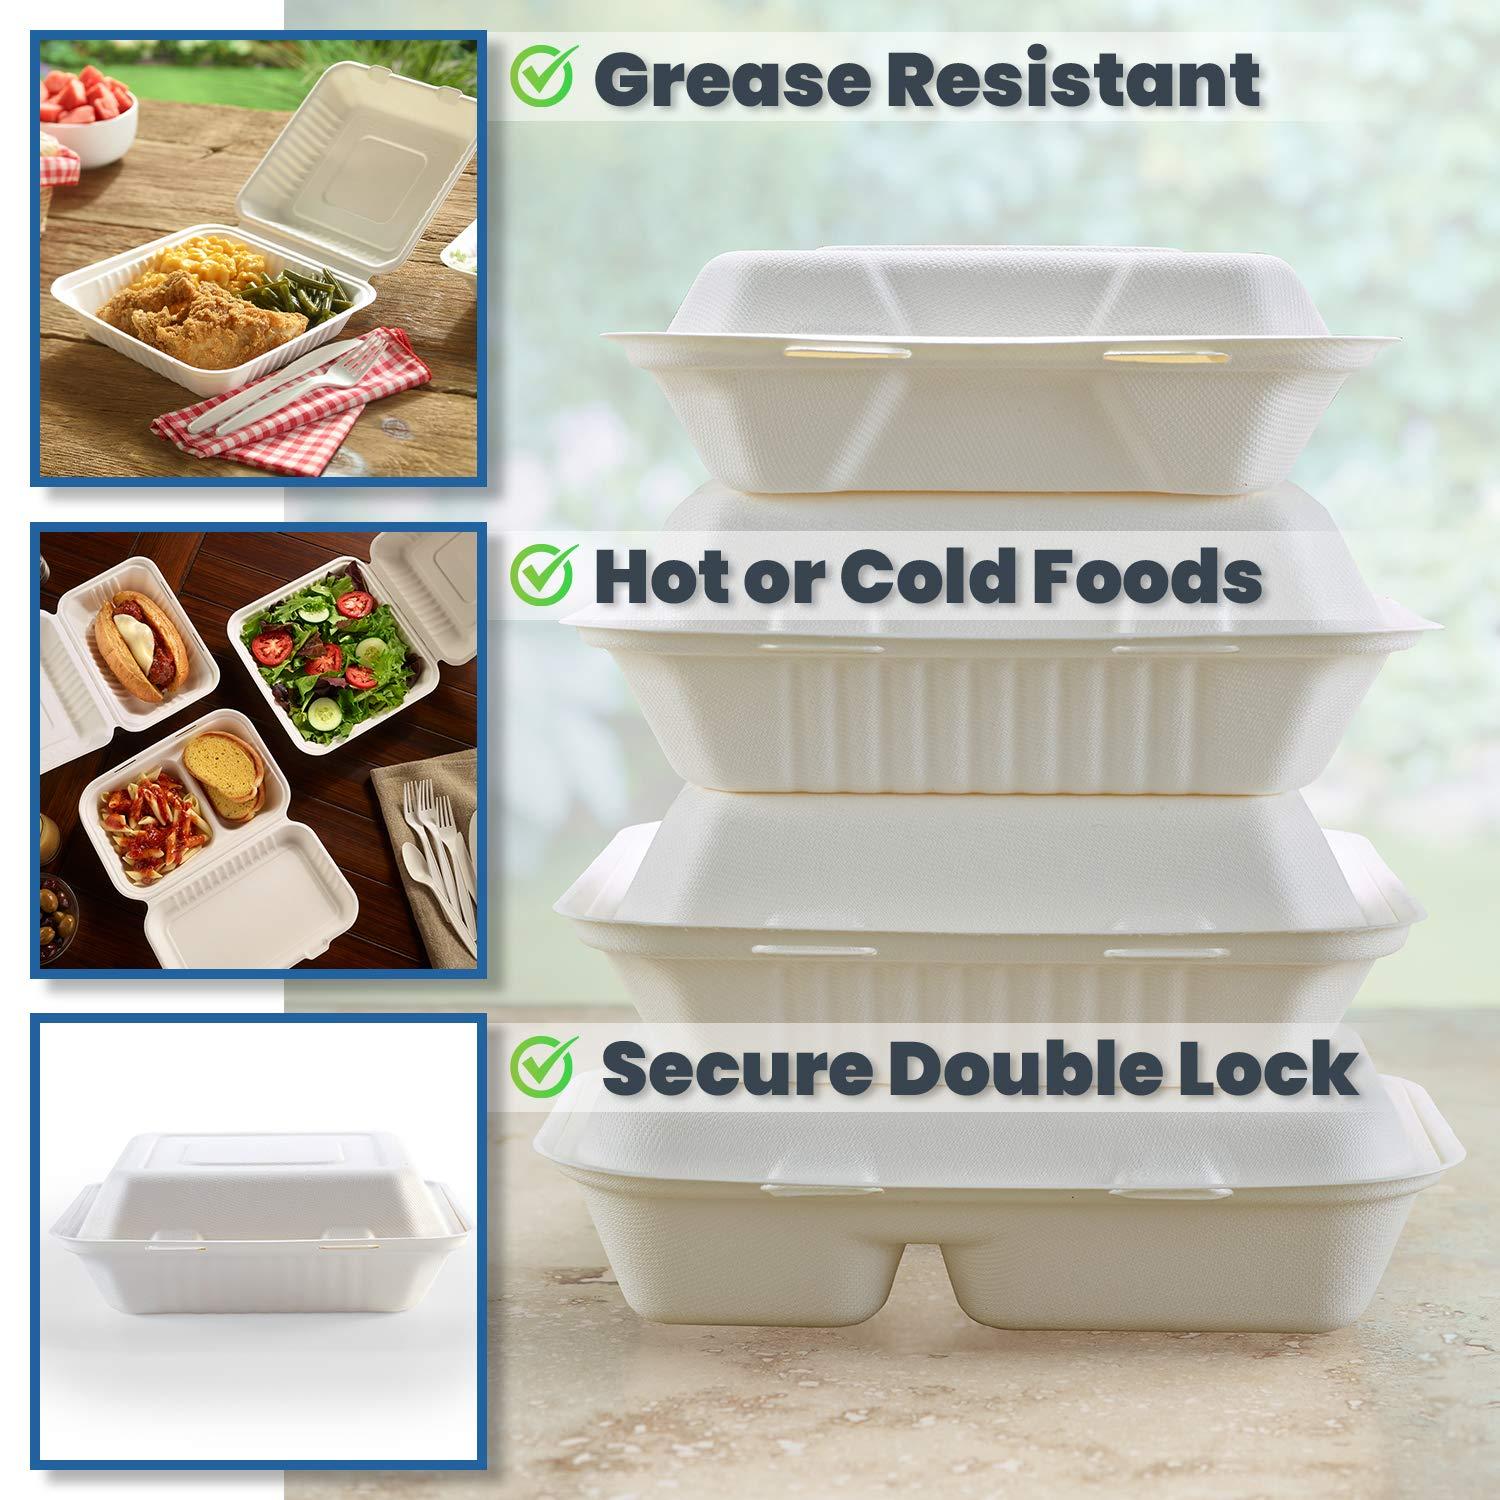 Chemicals in biodegradable food containers can leach into compost